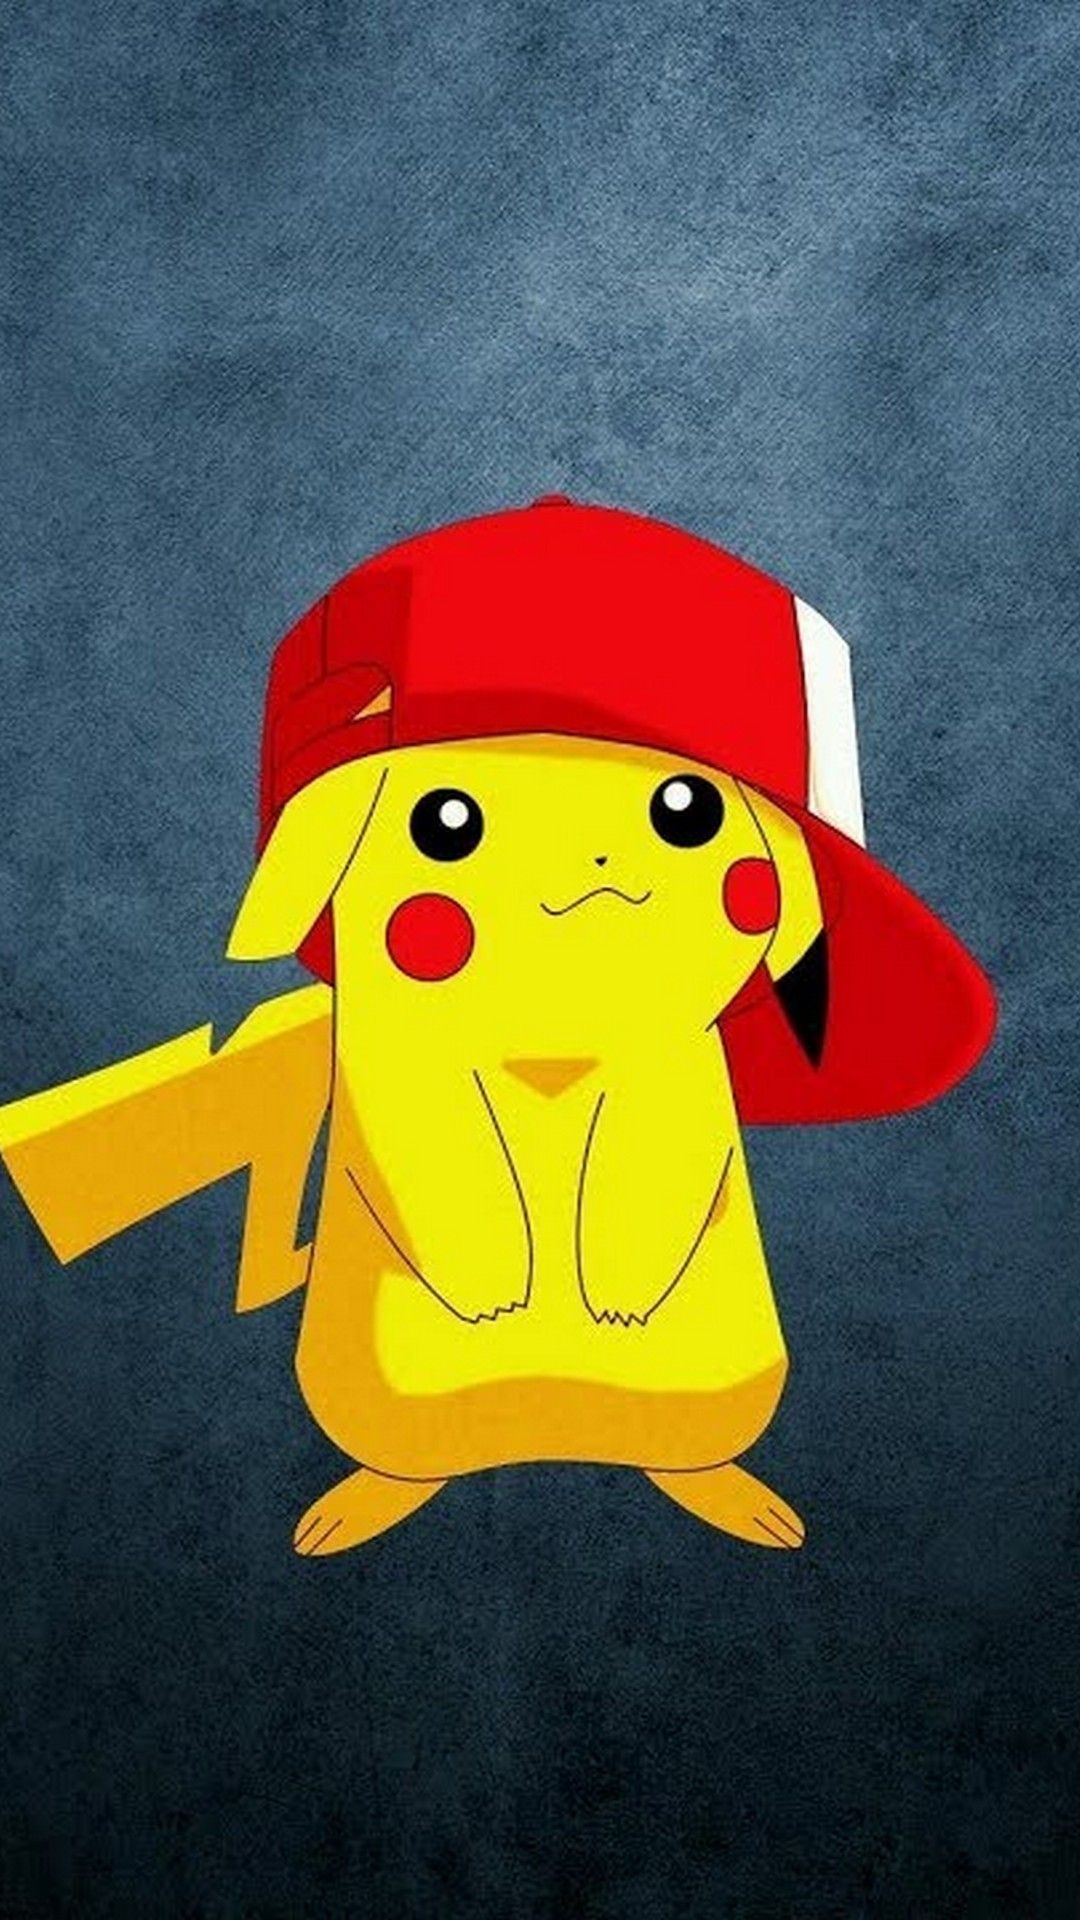 Pokemon Cool wallpaper for Android